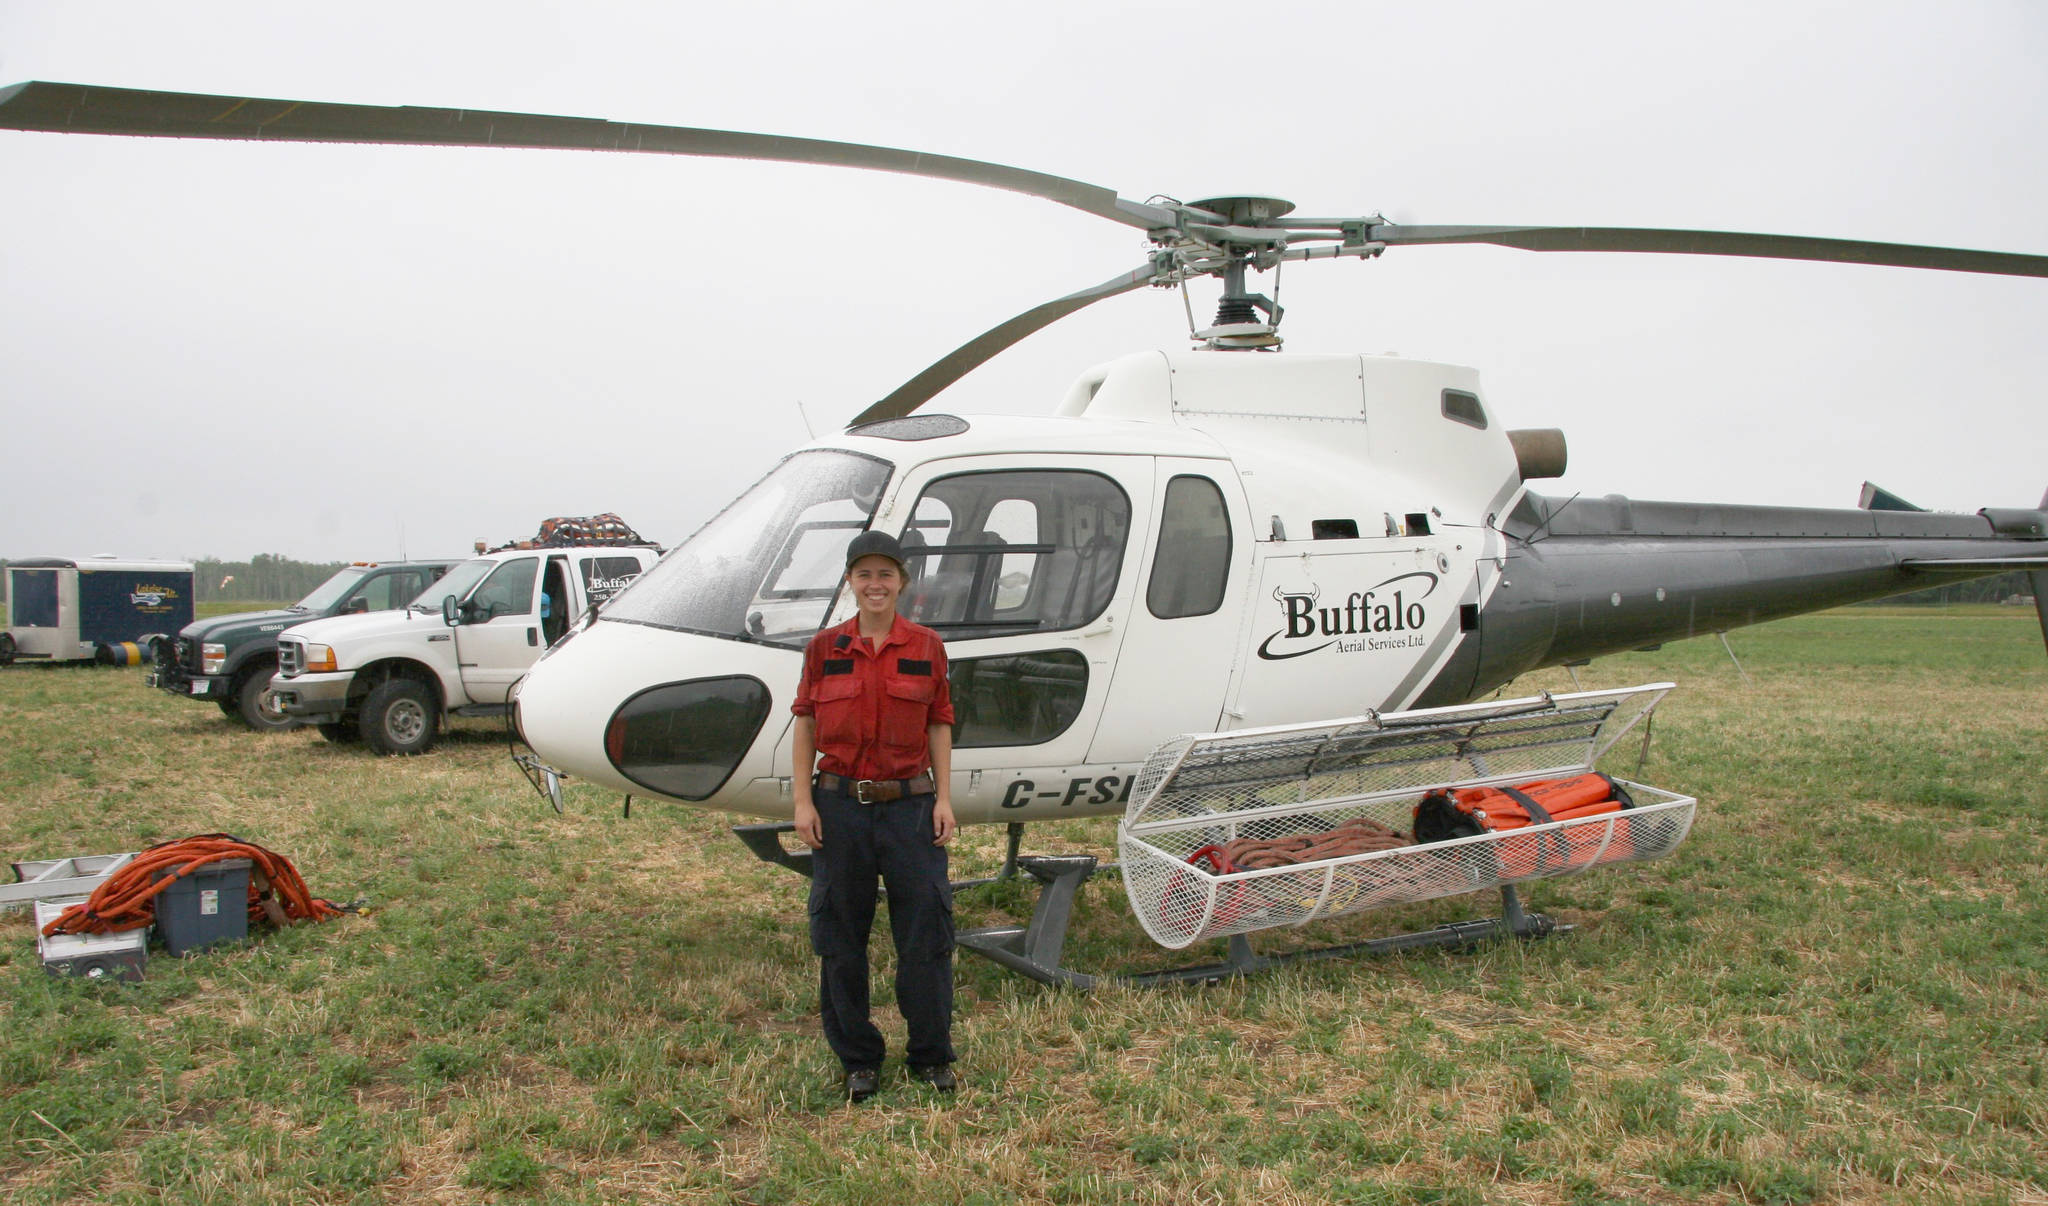 7815839_web1_Helicopter